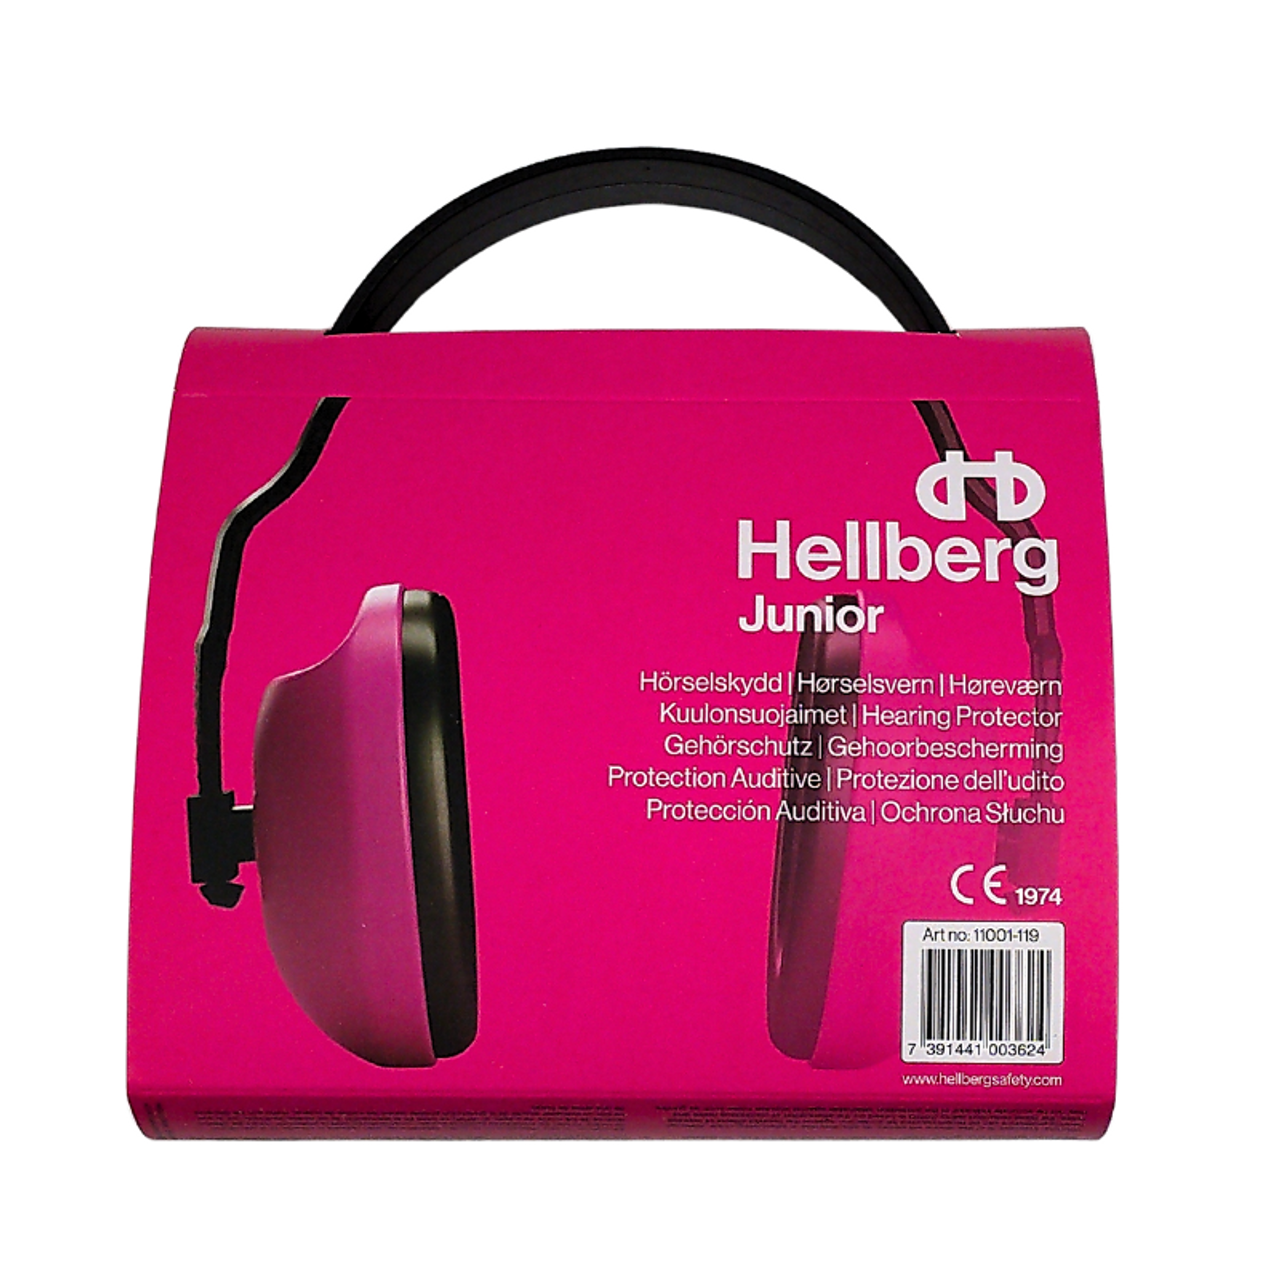 HELLBERG Ear Muffs | Where to buy JUNIOR Pink Class 2 Earmuffs  for Headband, Young Children, Formula 1 and V8 Supercars, Earmuffs for Workshop, Music Concerts and at Home